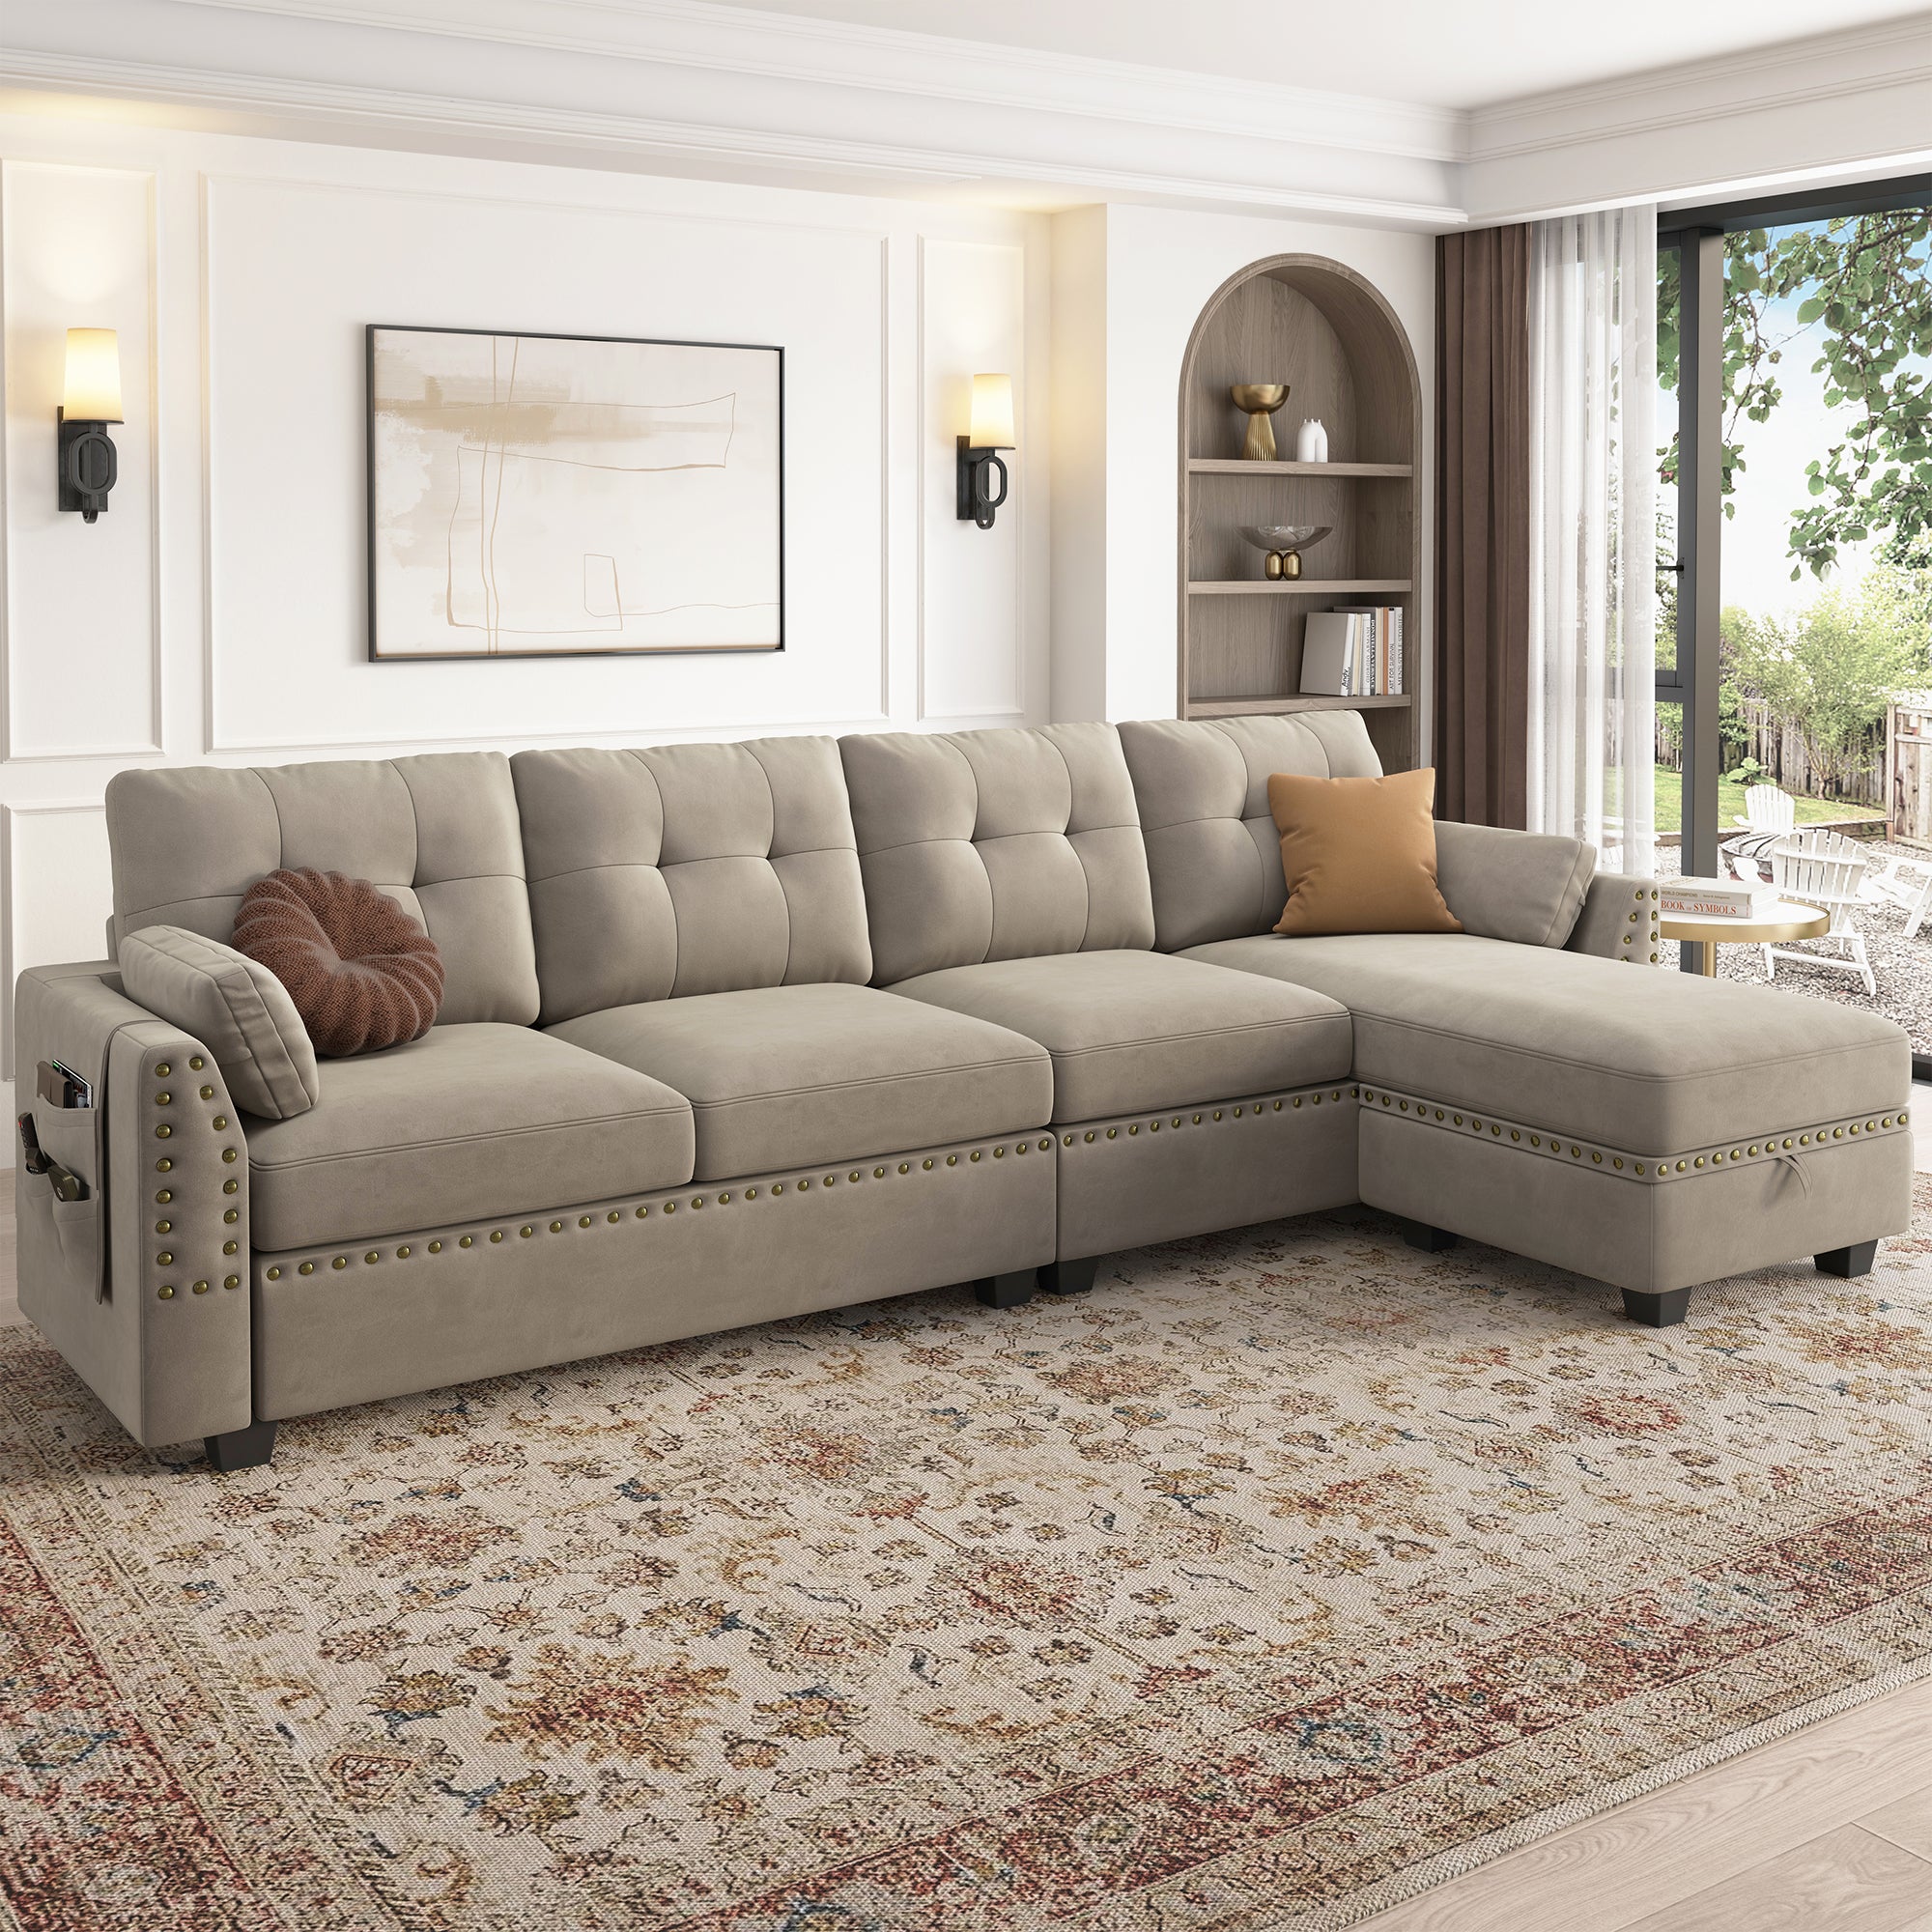 HONBAY Velvet 4-Seat L-Shaped Sectional Sofa with Storage Chaise